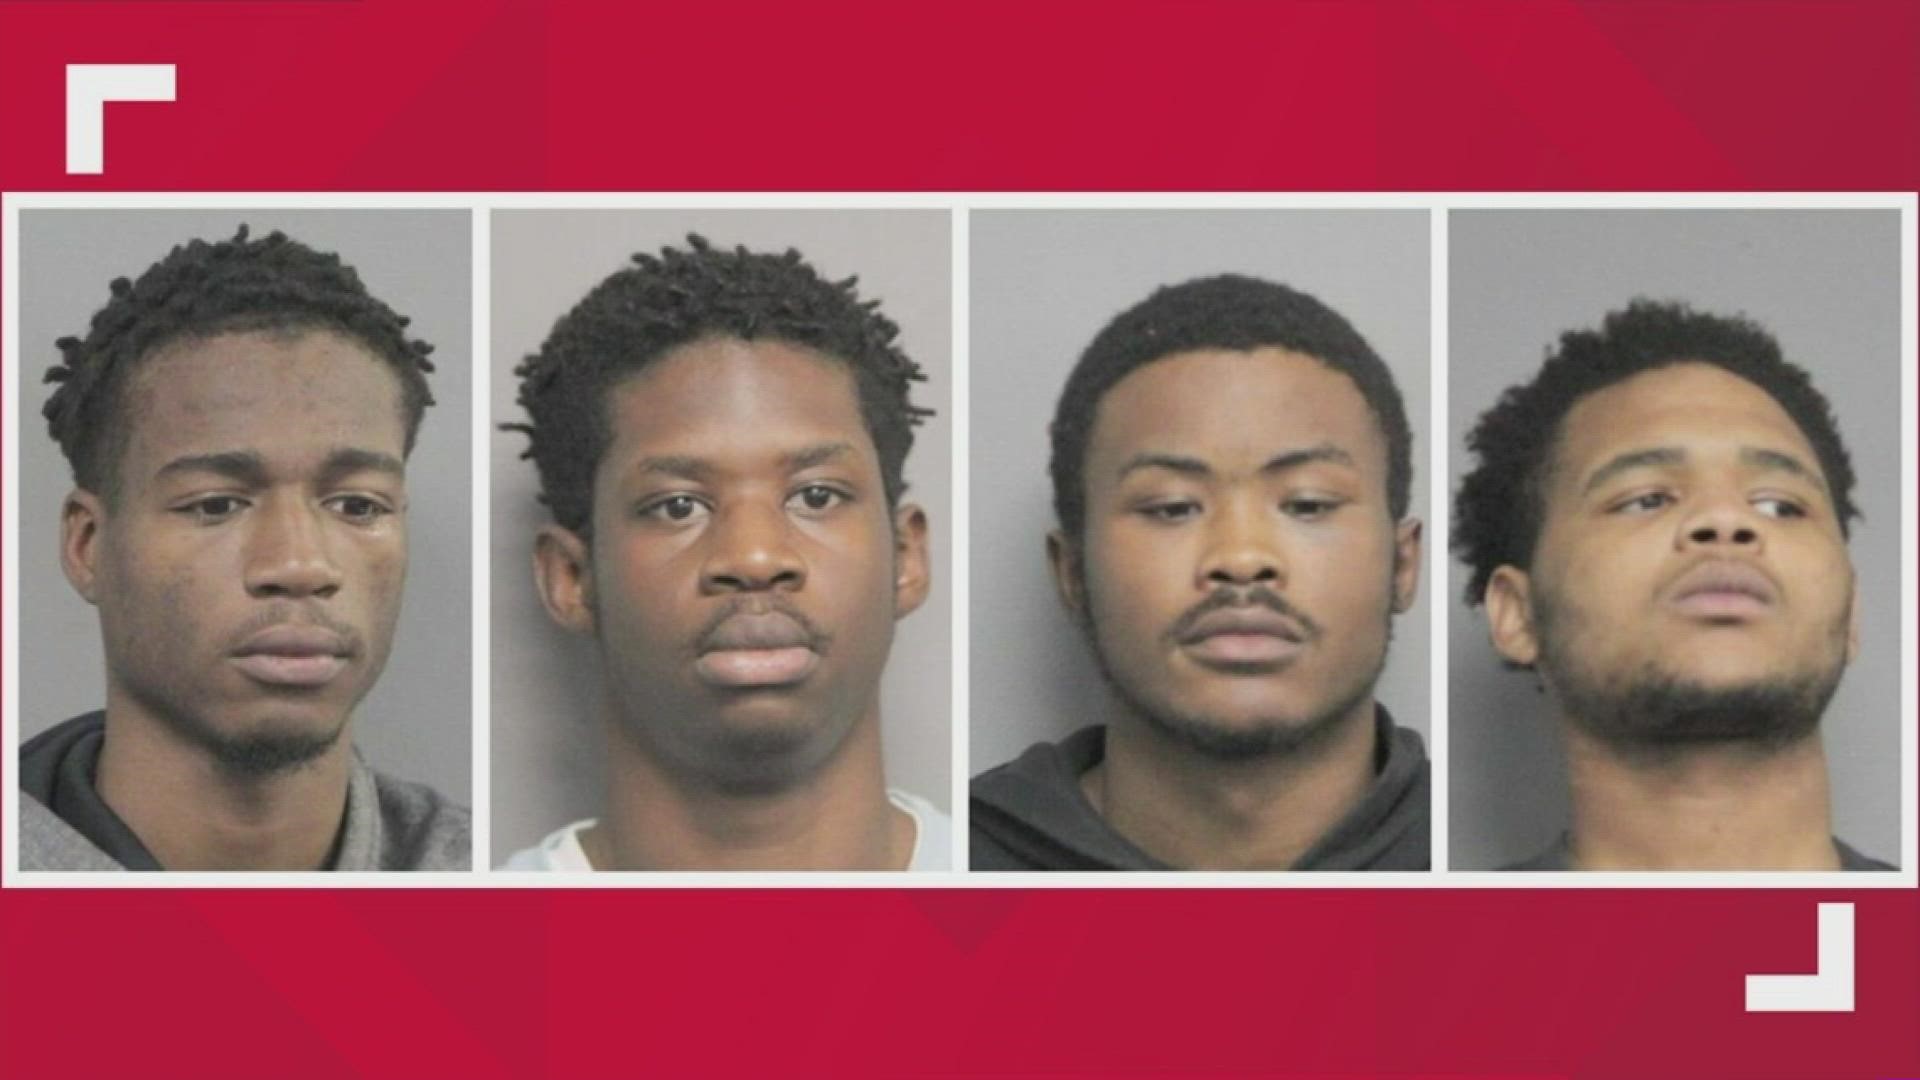 The four men allegedly shot and killed 21-year-old Jemond Cador on Dec. 6 in his apartment in the 200 block of Wright Avenue, the report said.